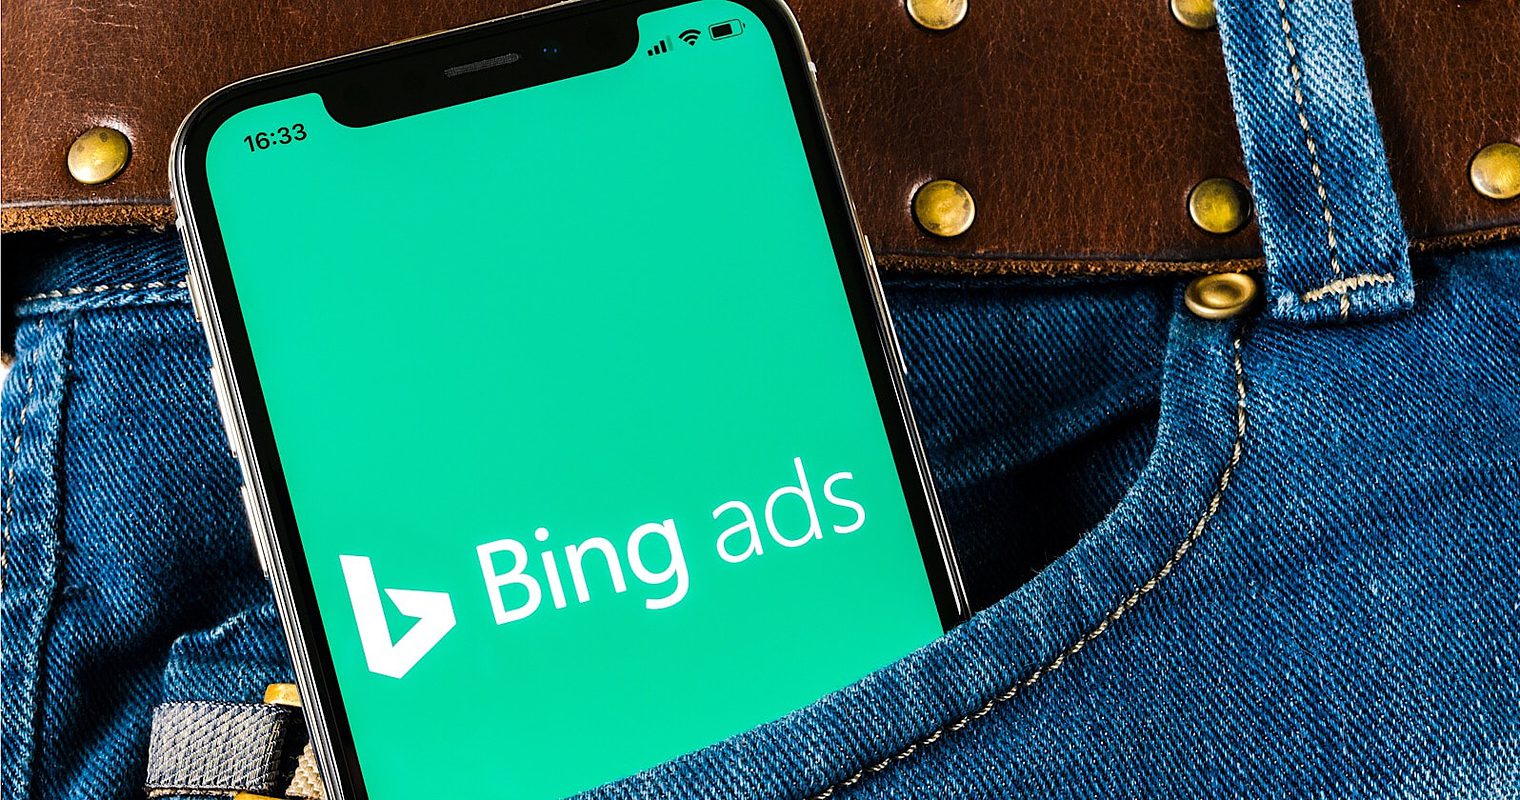 Bing Ads Rolls Out New Features for Importing Google AdWords Campaigns